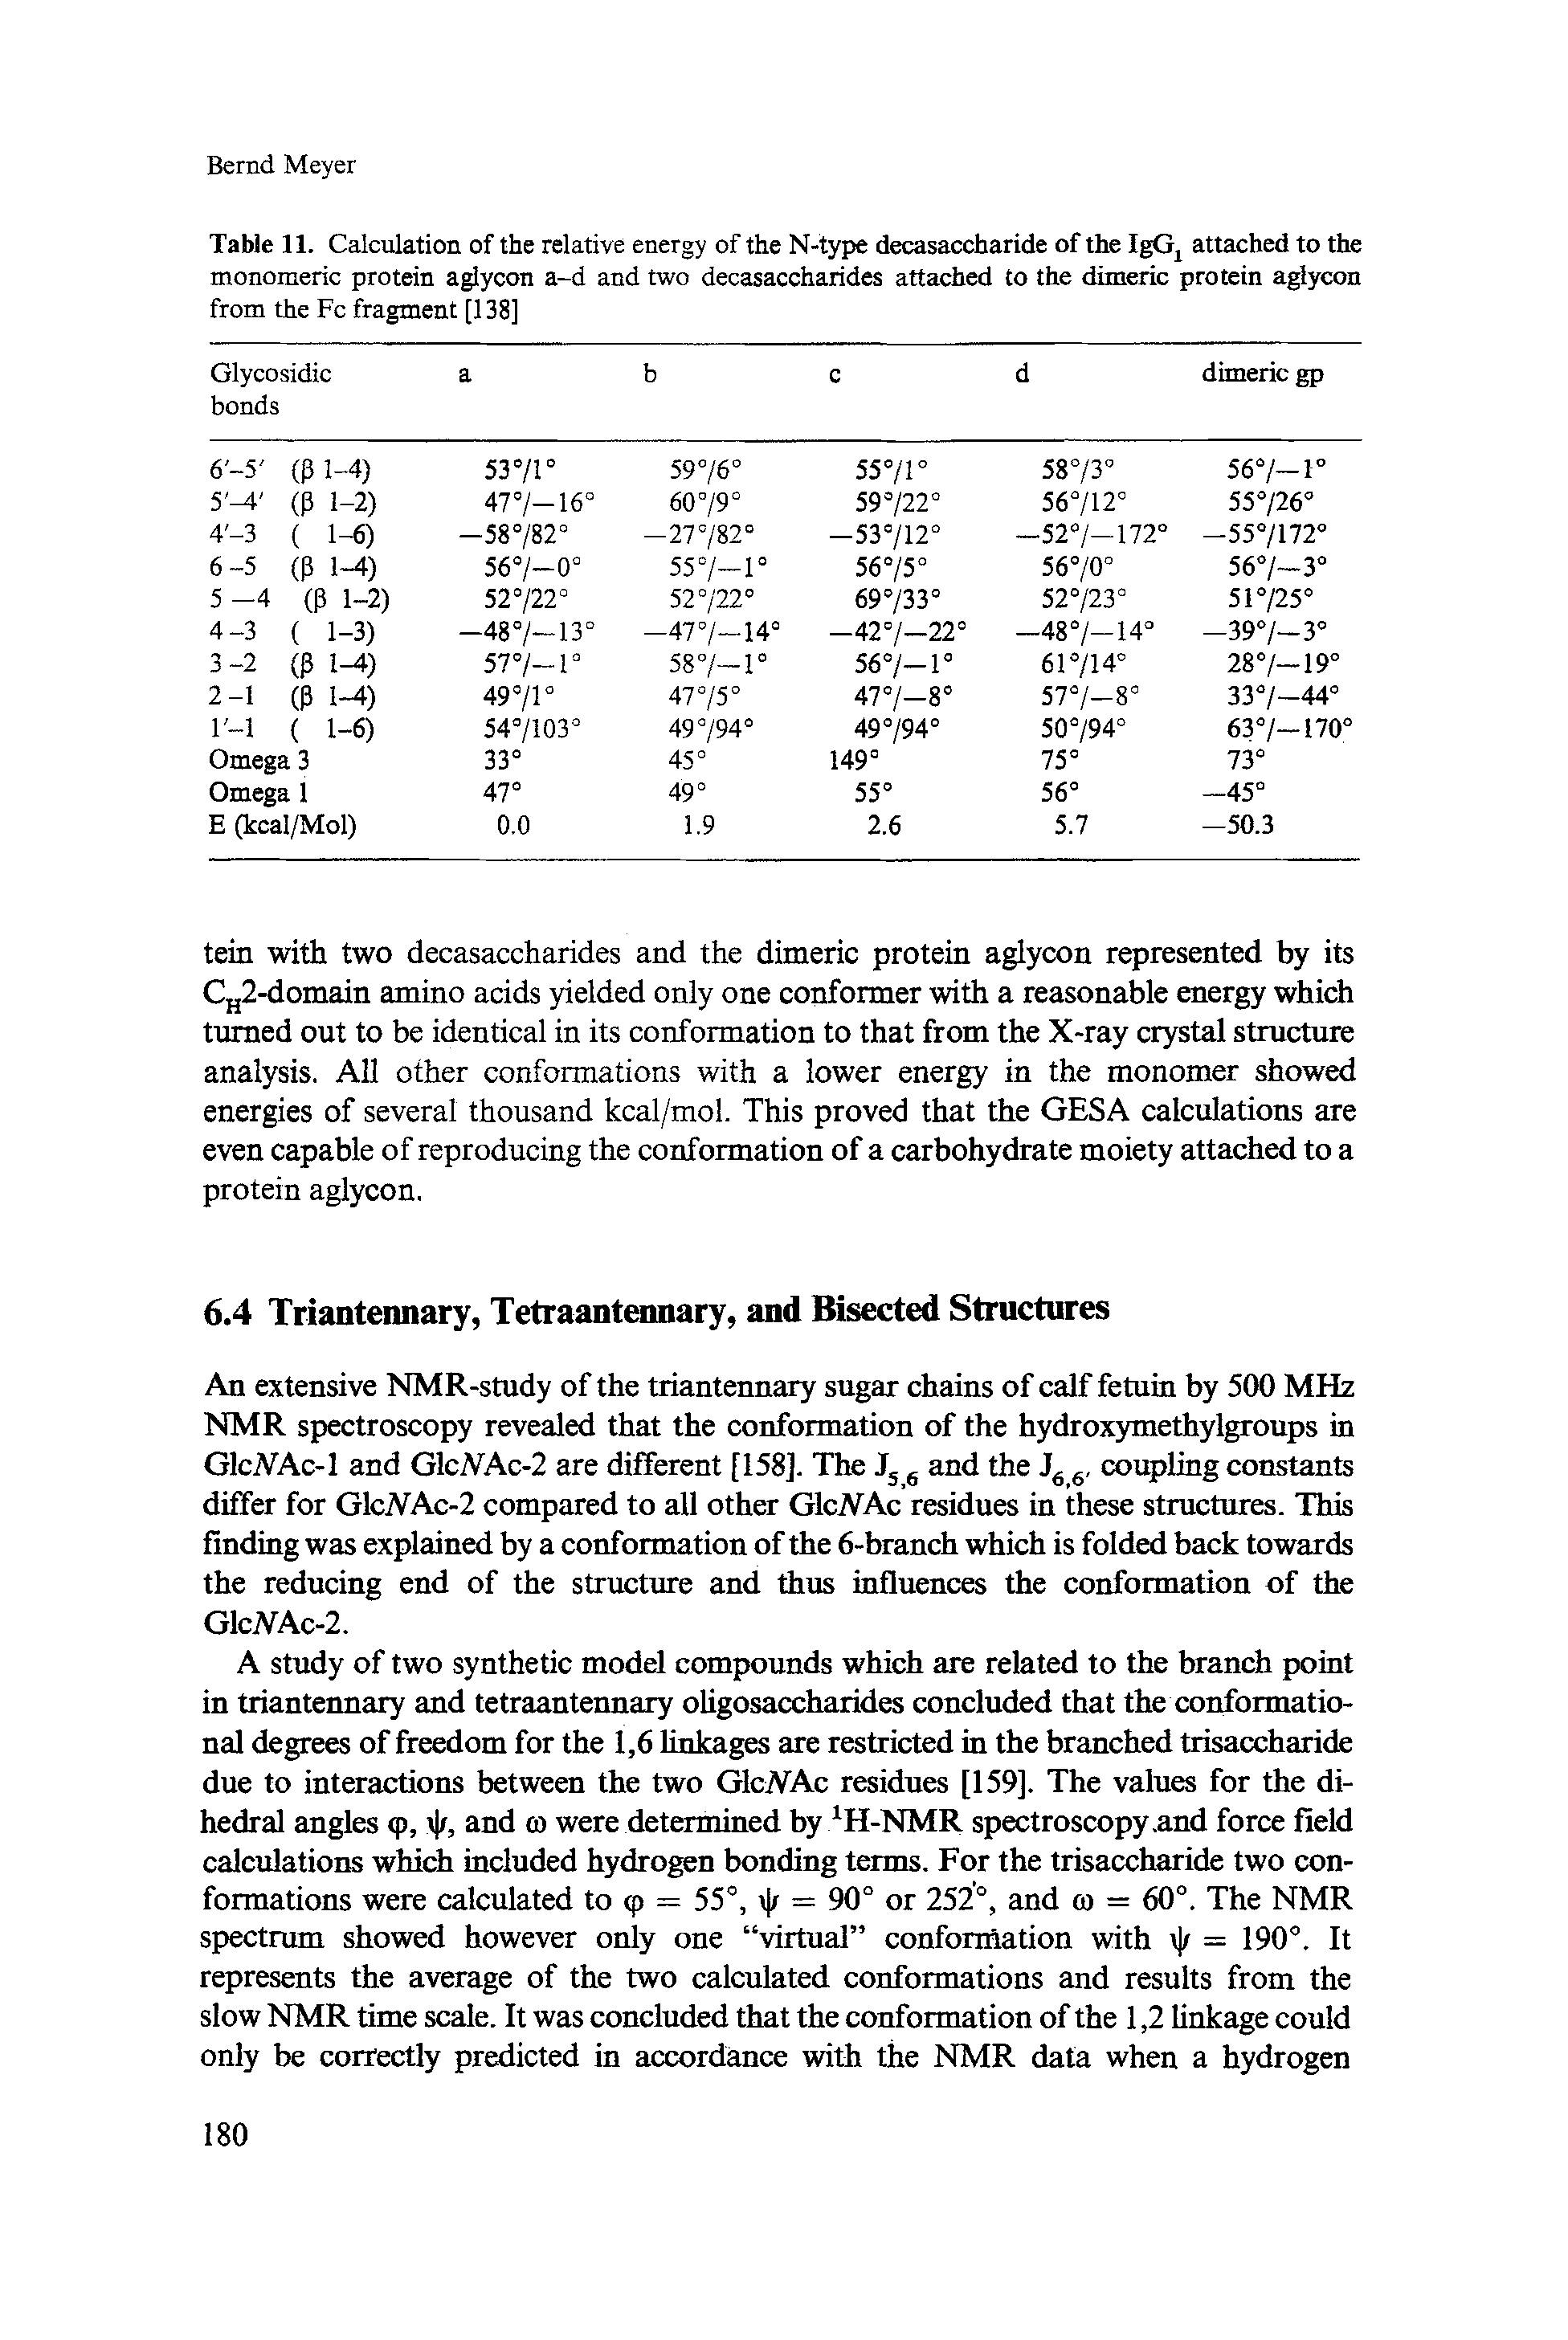 Table 11. Calculation of the relative energy of the N-type decasaccharide of the IgGj attached to the monomeric protein aglycon a-d and two decasaccharides attached to the dimeric protein aglycon from the Fc fragment [138]...